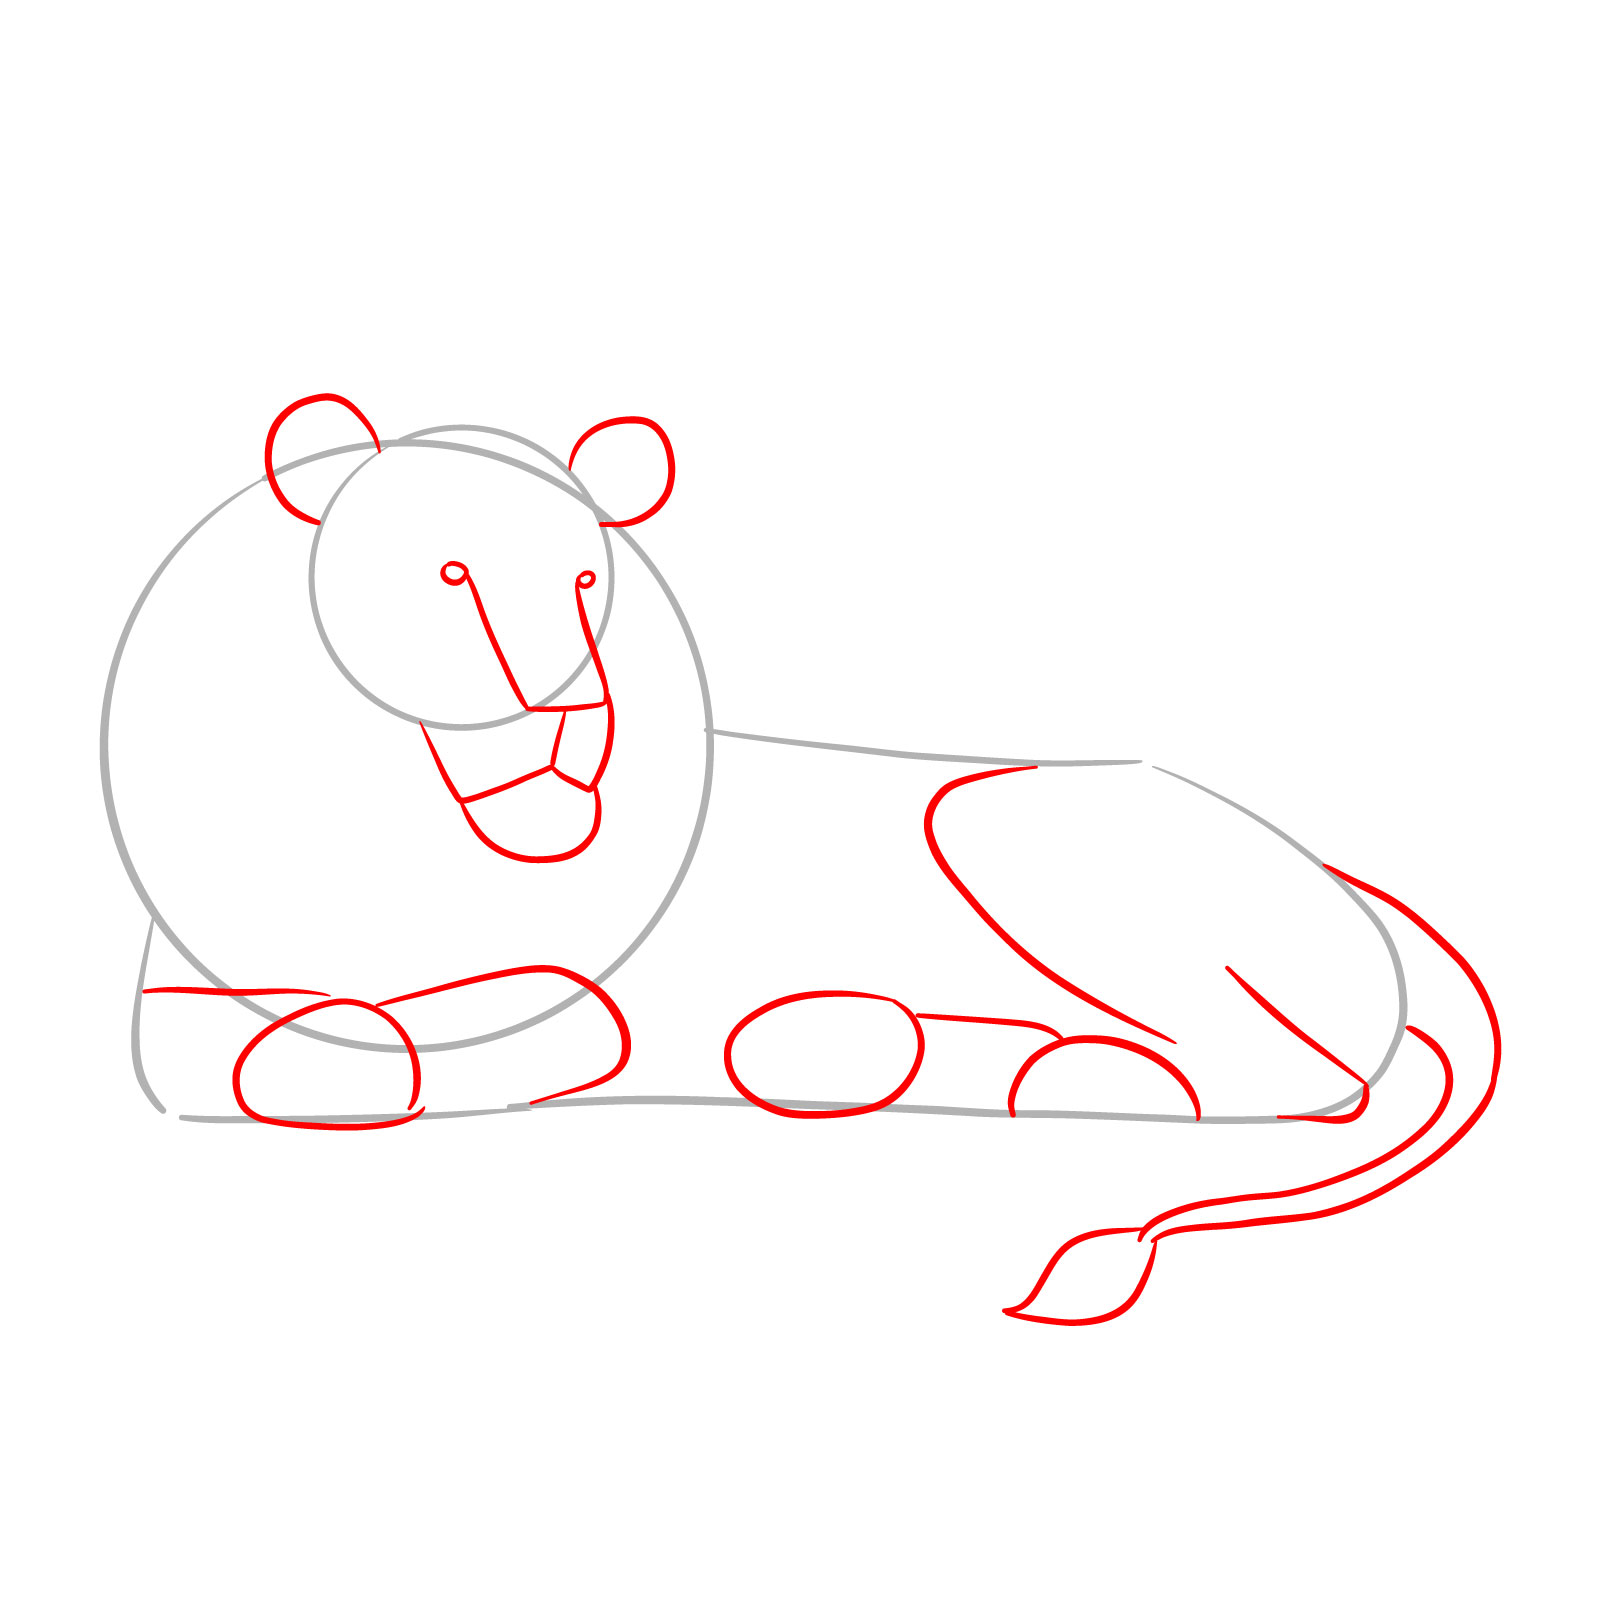 Lying lion drawing - Step 2: Adding basic facial and body shapes